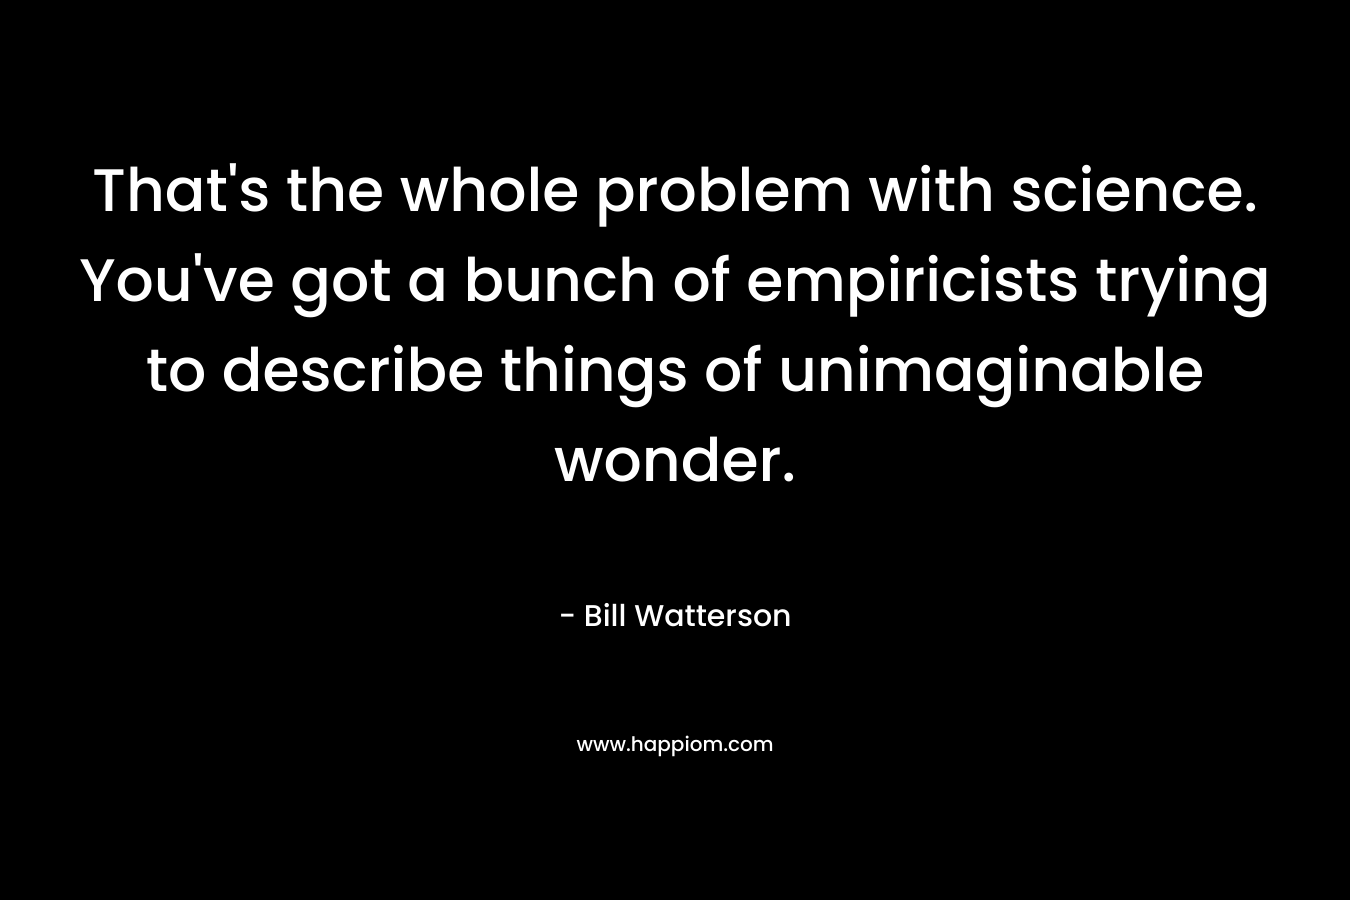 That's the whole problem with science. You've got a bunch of empiricists trying to describe things of unimaginable wonder.